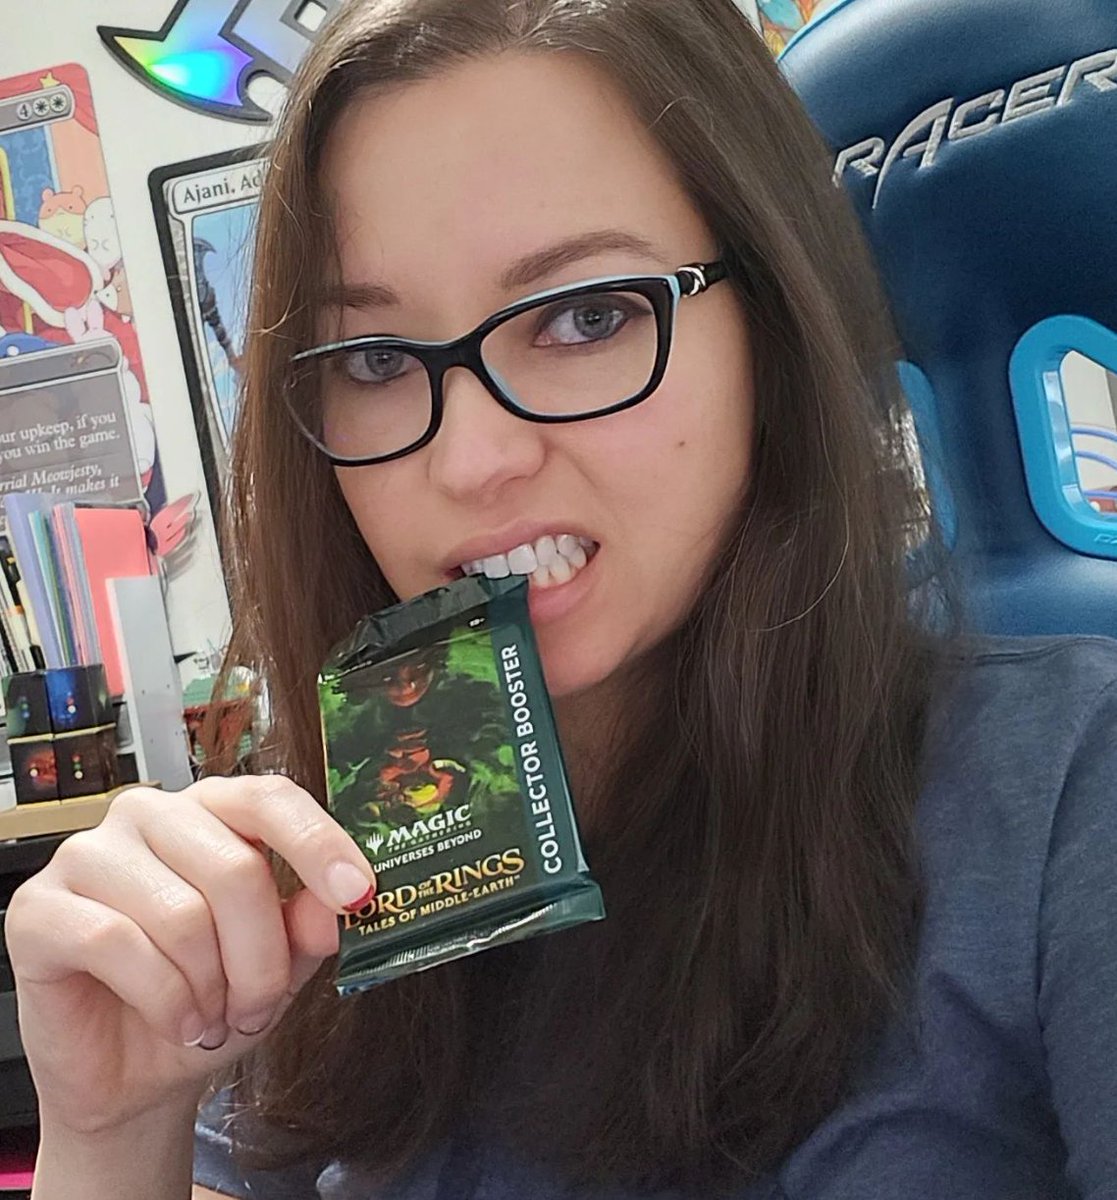 Today is my Last @Whatnot stream! Come support the channel by getting a free $15 and picking up some tokens or packs. Starts in 10 min! $15 free for tokens and packs: whatnot.com/invite/mtgnerd… Stream: whatnot.com/live/8af92c9e-…